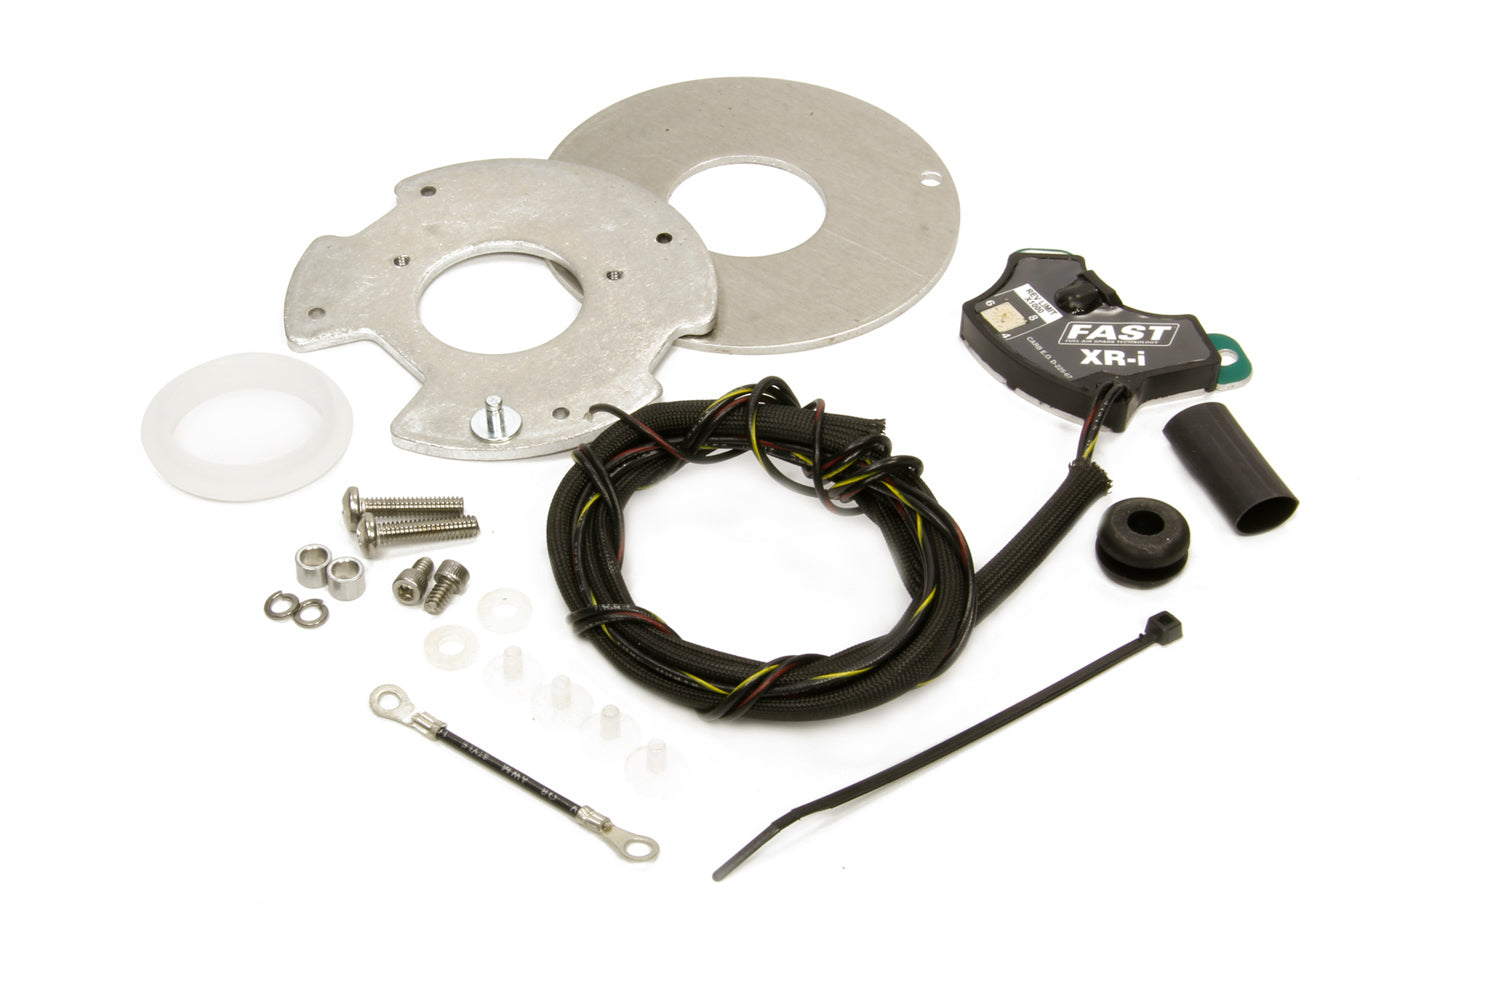 FAST Ford XR-1 Points Ign. Conversion Kit FST750-1700